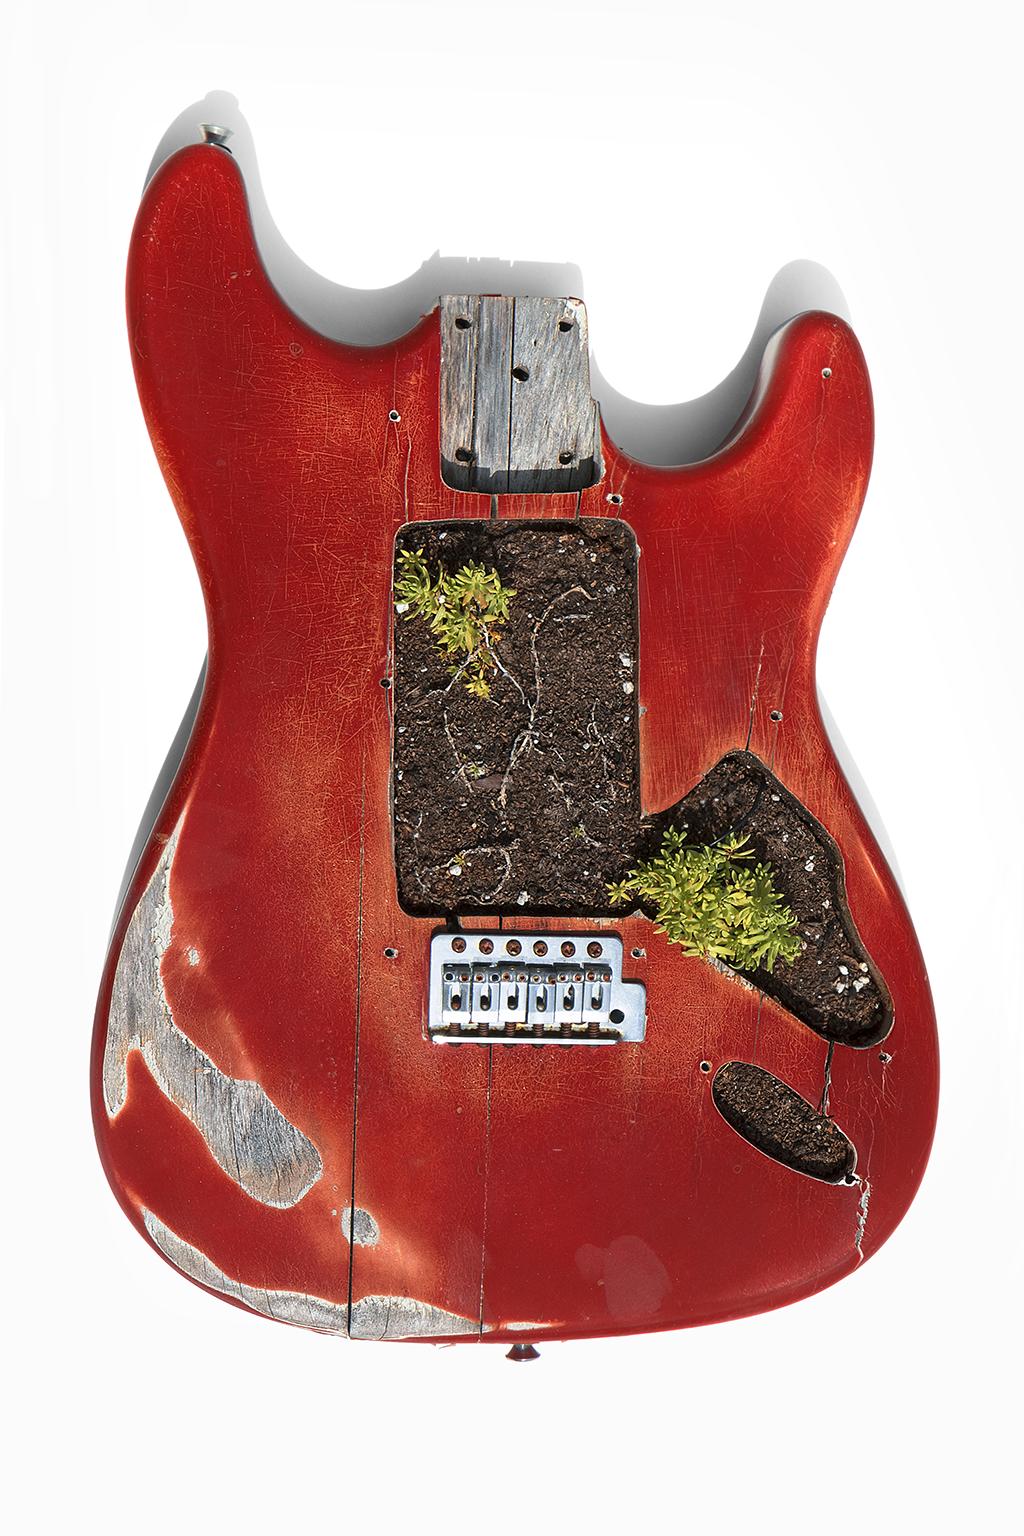 Kevin Krag Color Photograph - Something got me started. Color photograph of a assembled guitars body Sculpture